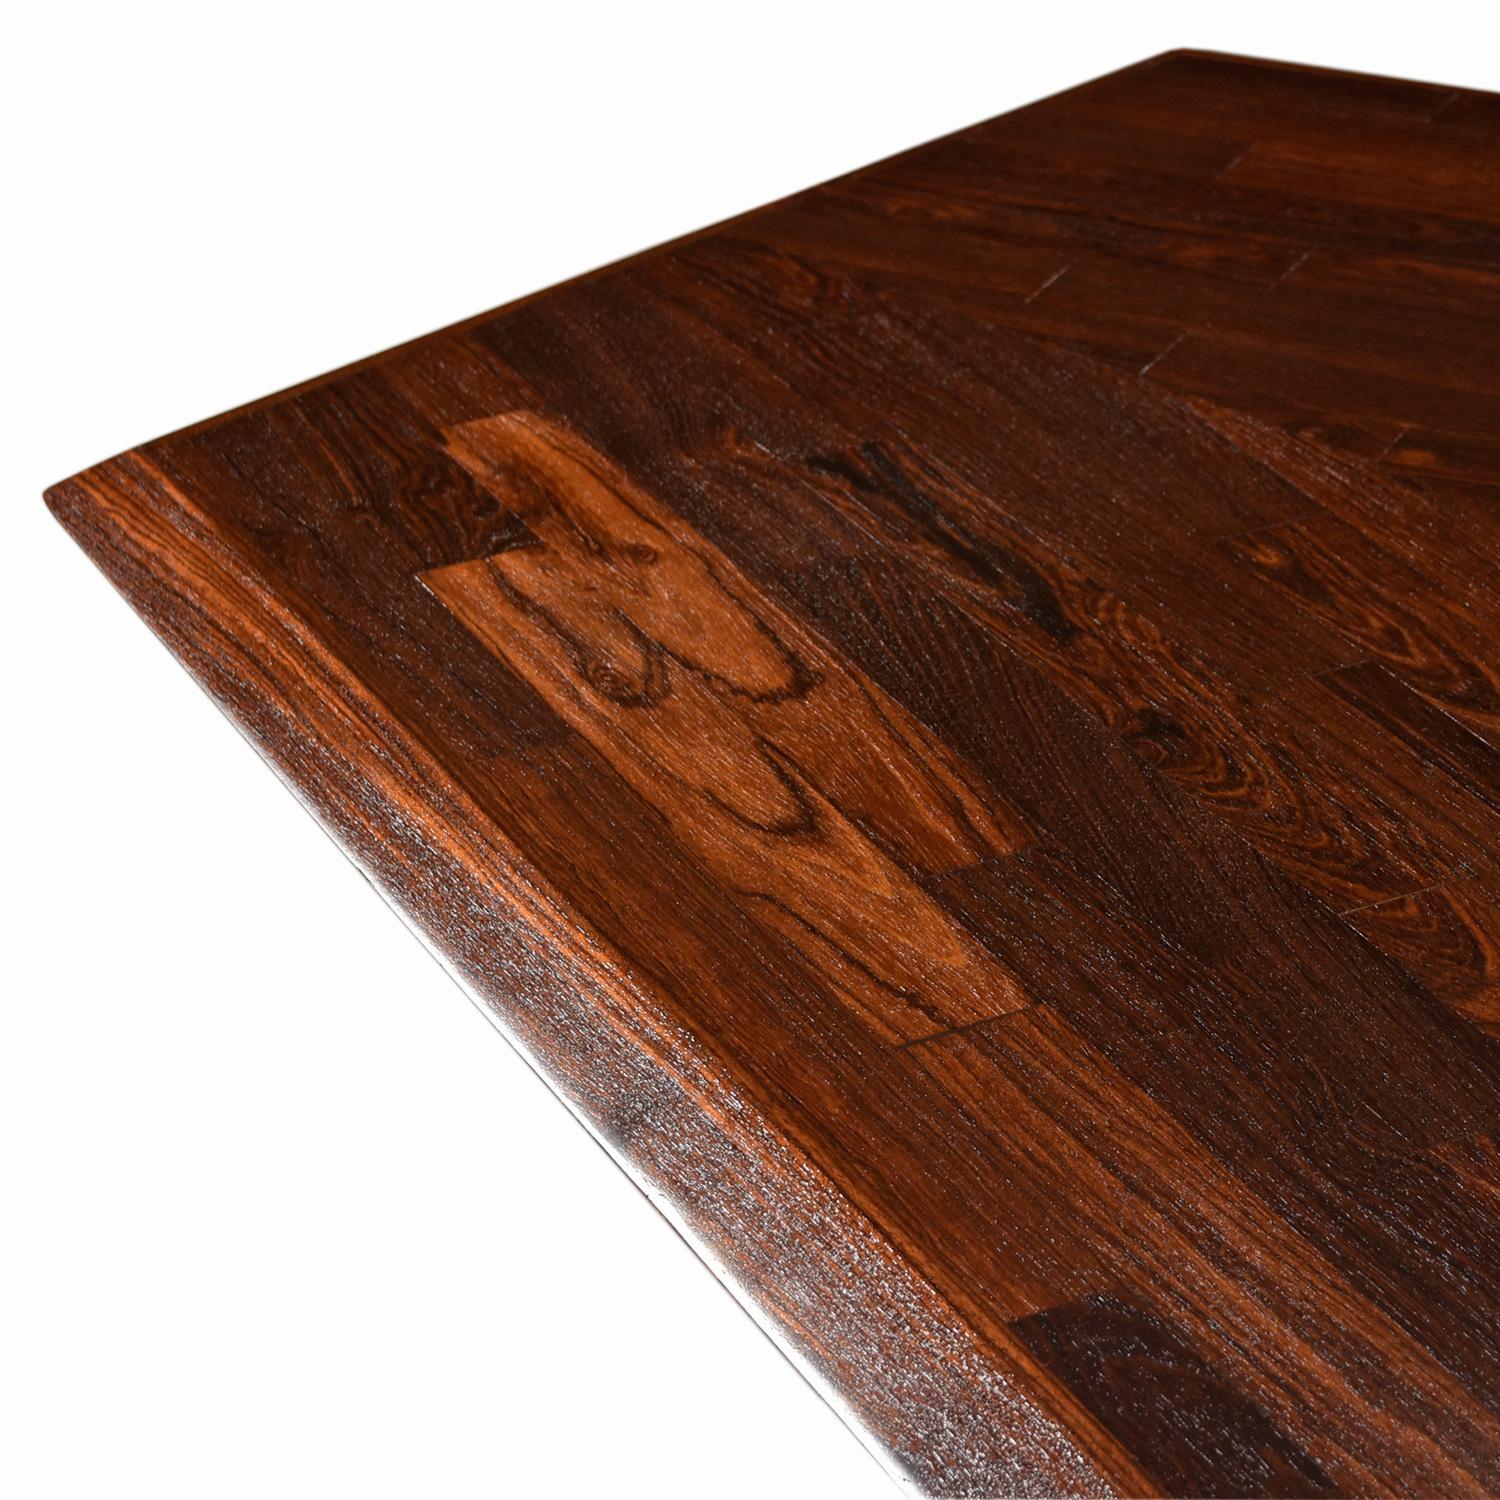 Cocobolo Rosewood Dining Table by Don S. Shoemaker for Señal S.A. of Mexico For Sale 2